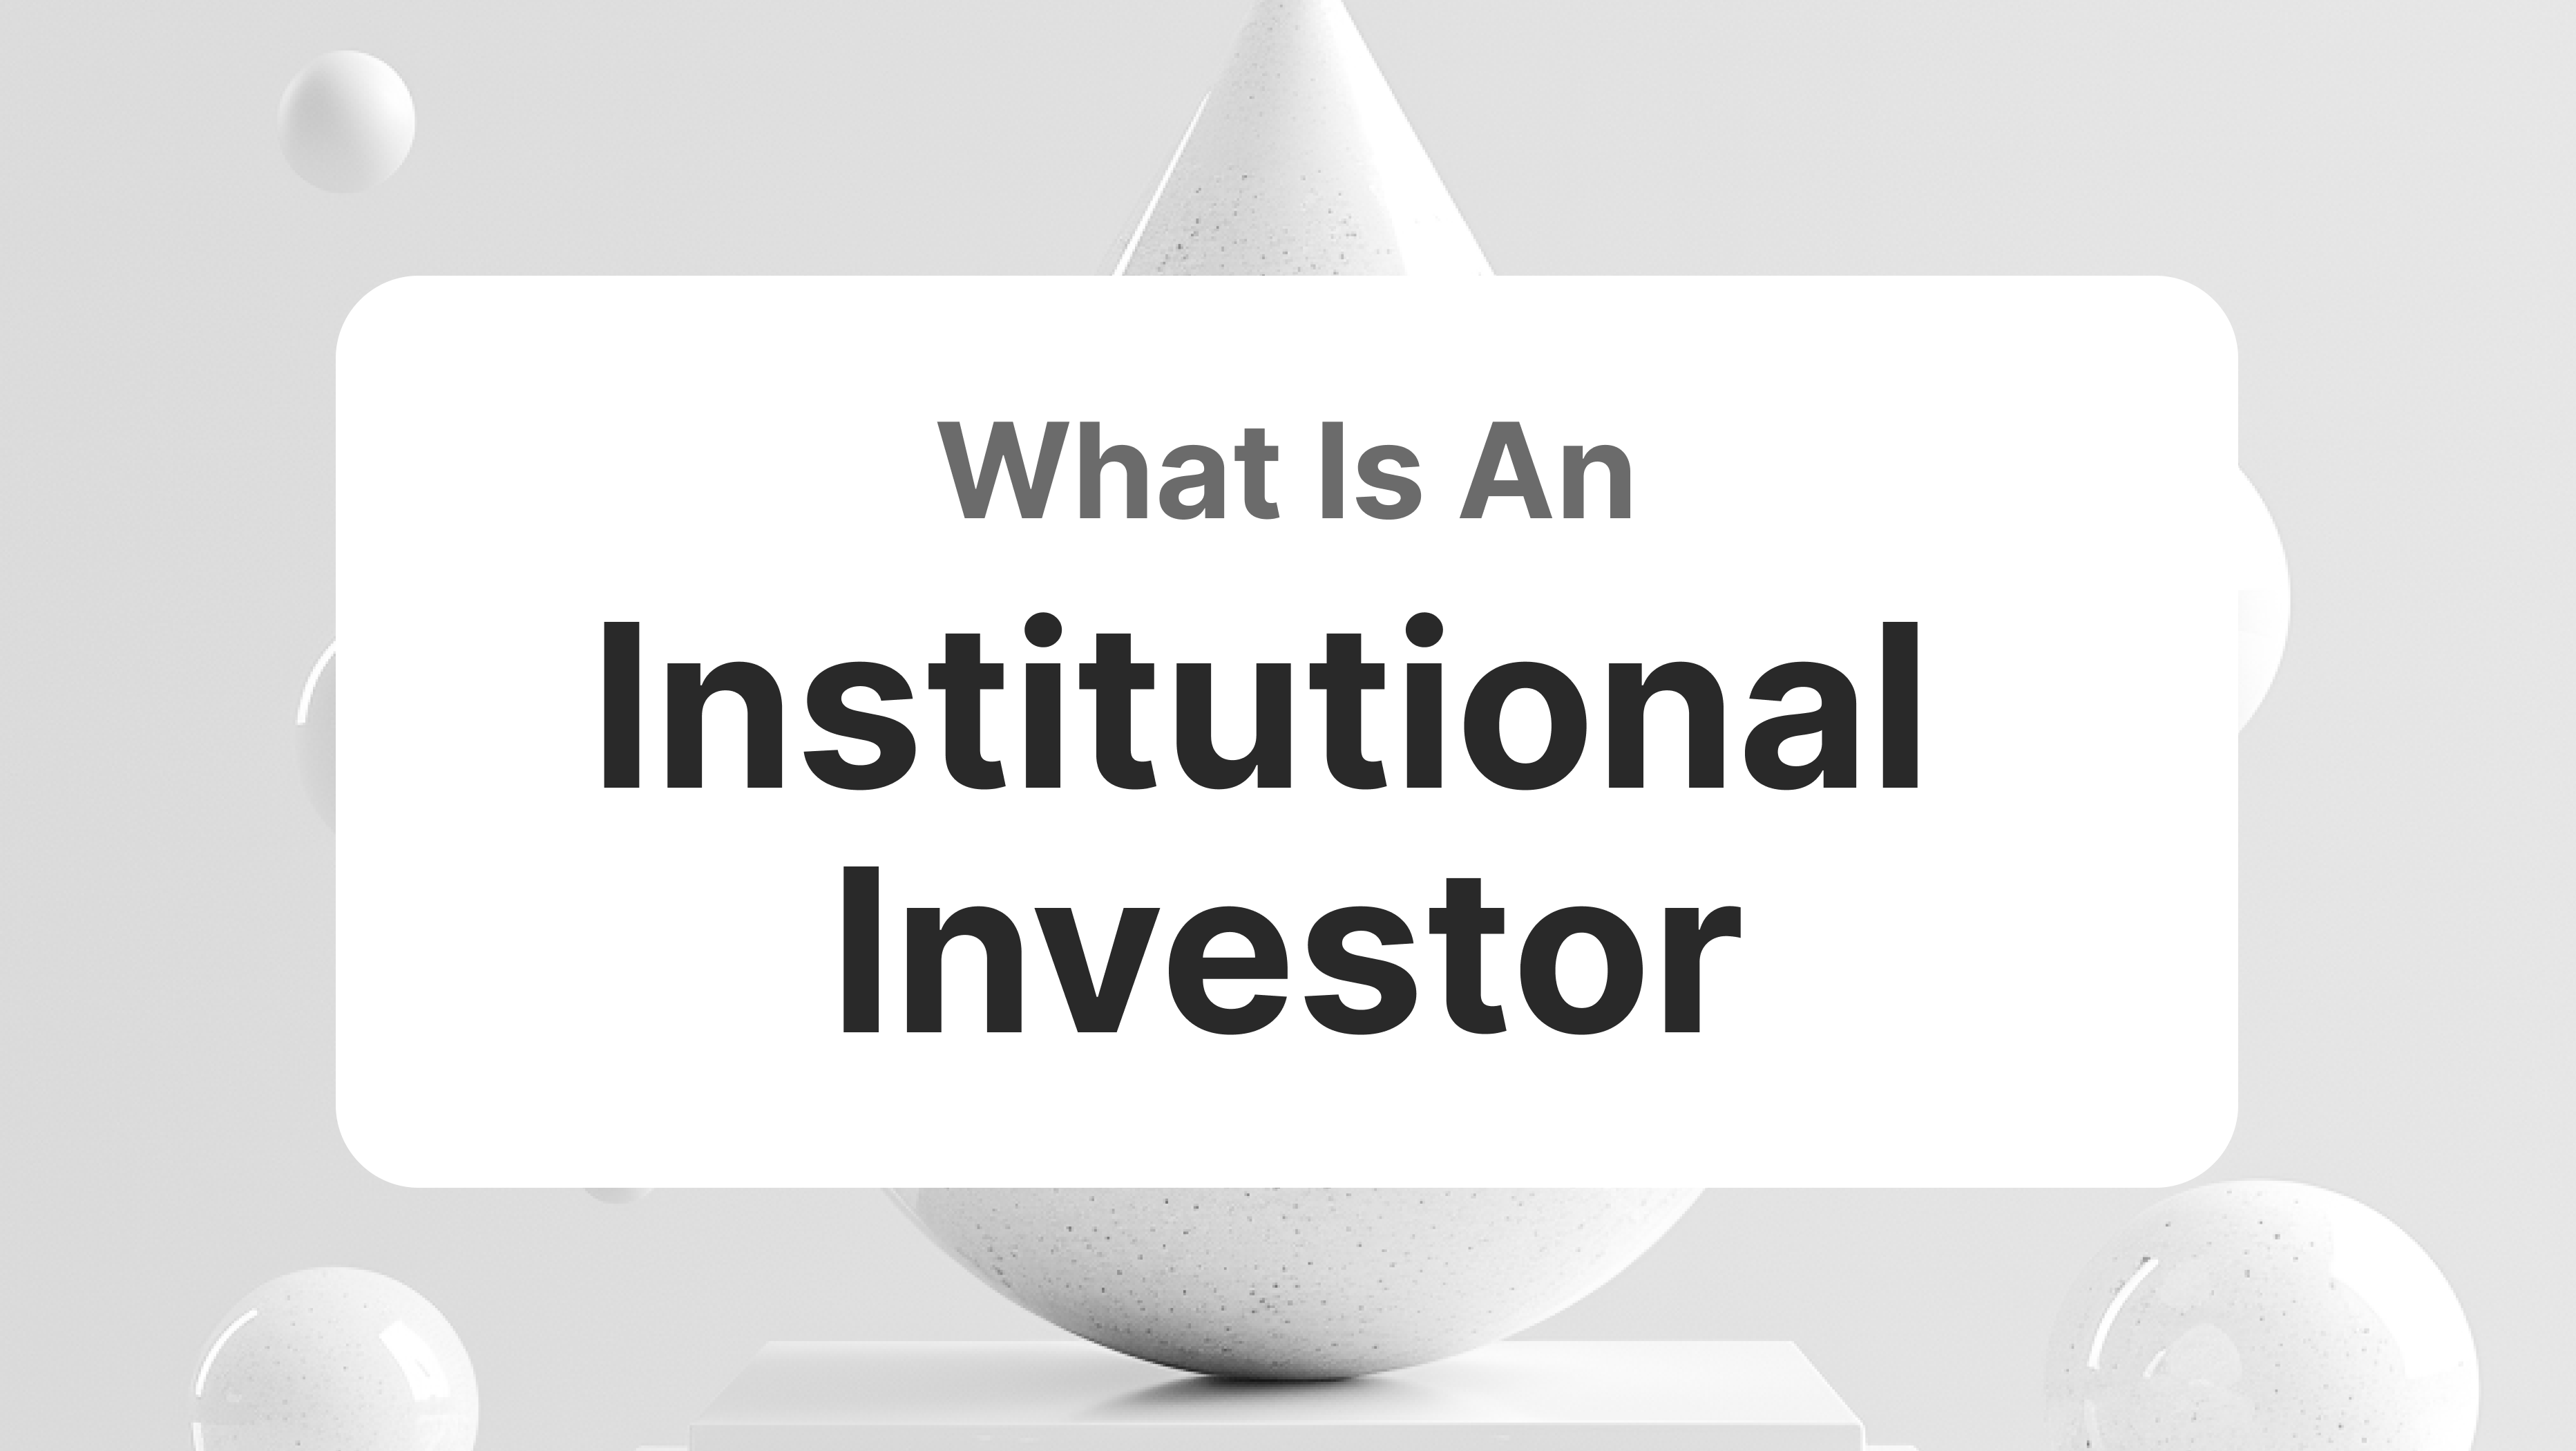 What Is An Institutional Investor